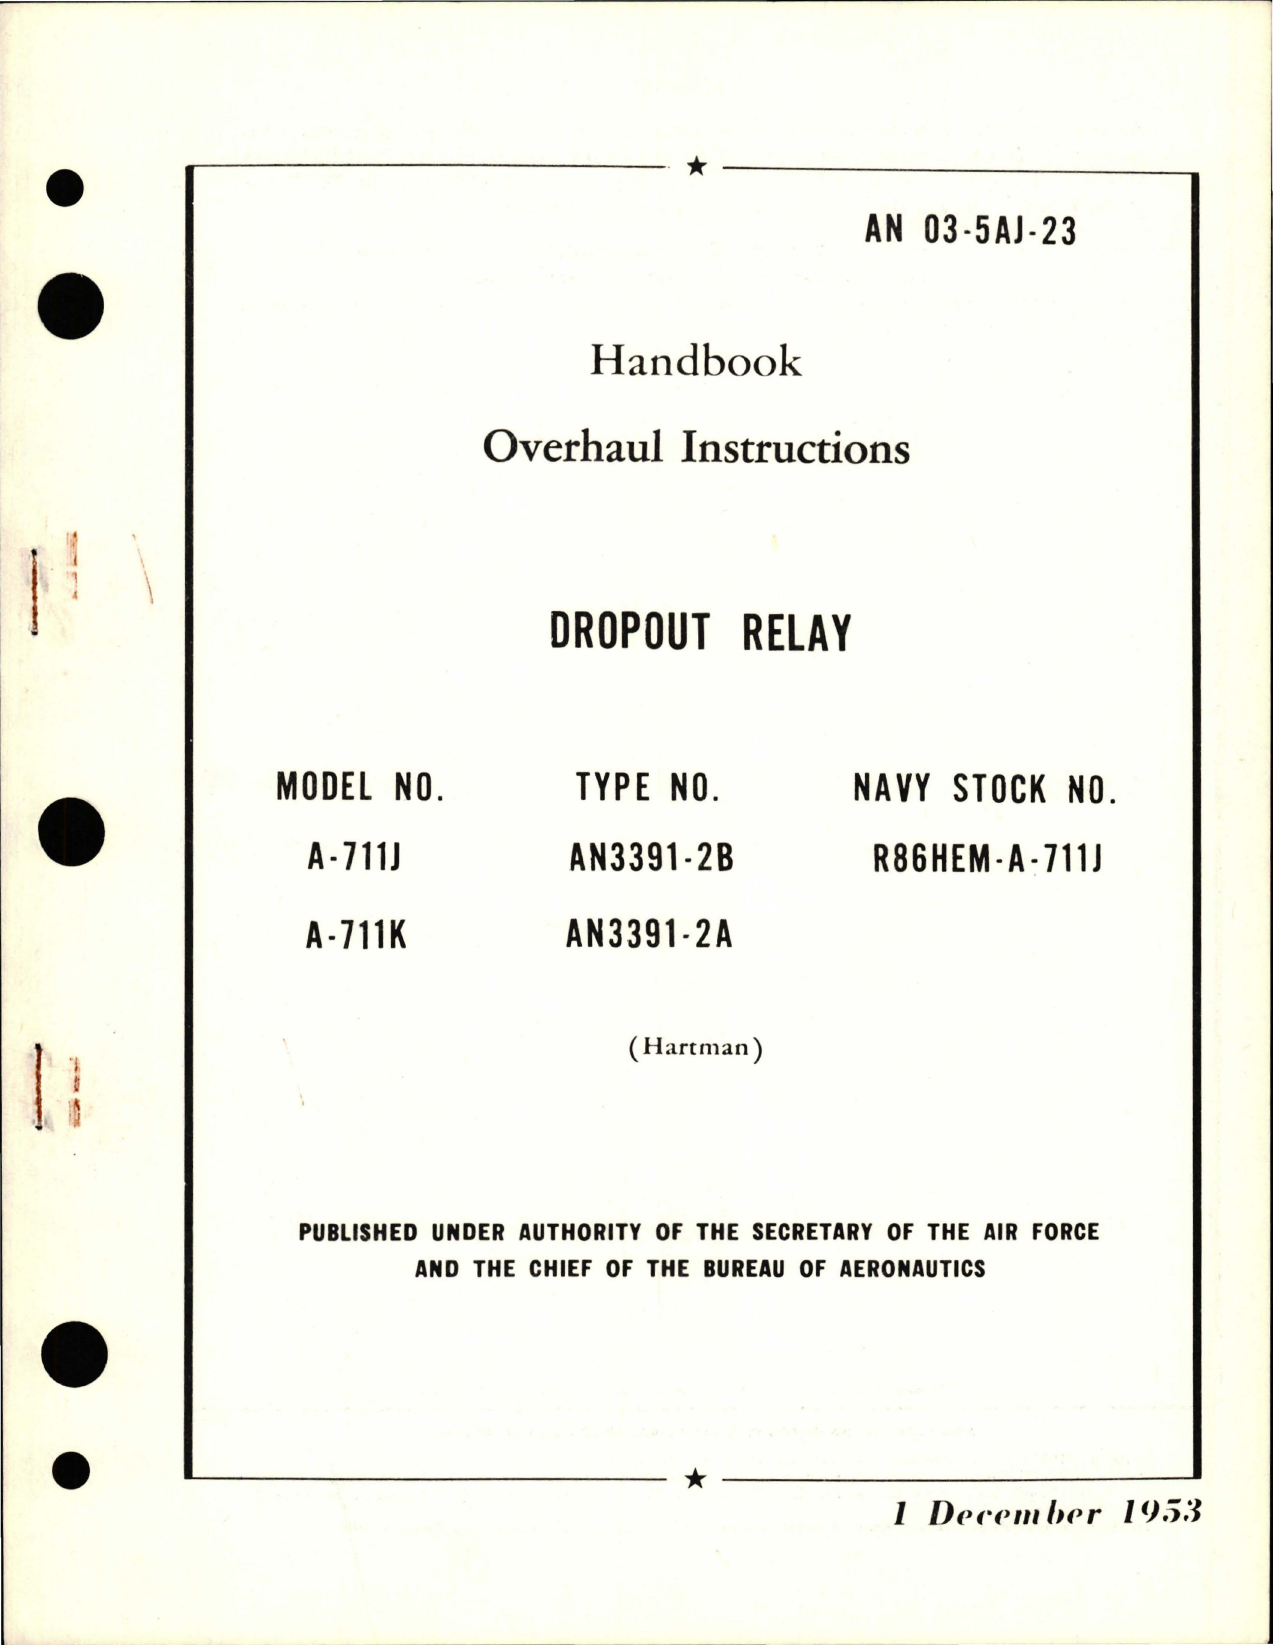 Sample page 1 from AirCorps Library document: Overhaul Instructions for Dropout Relay - Model A-711J and A-711K